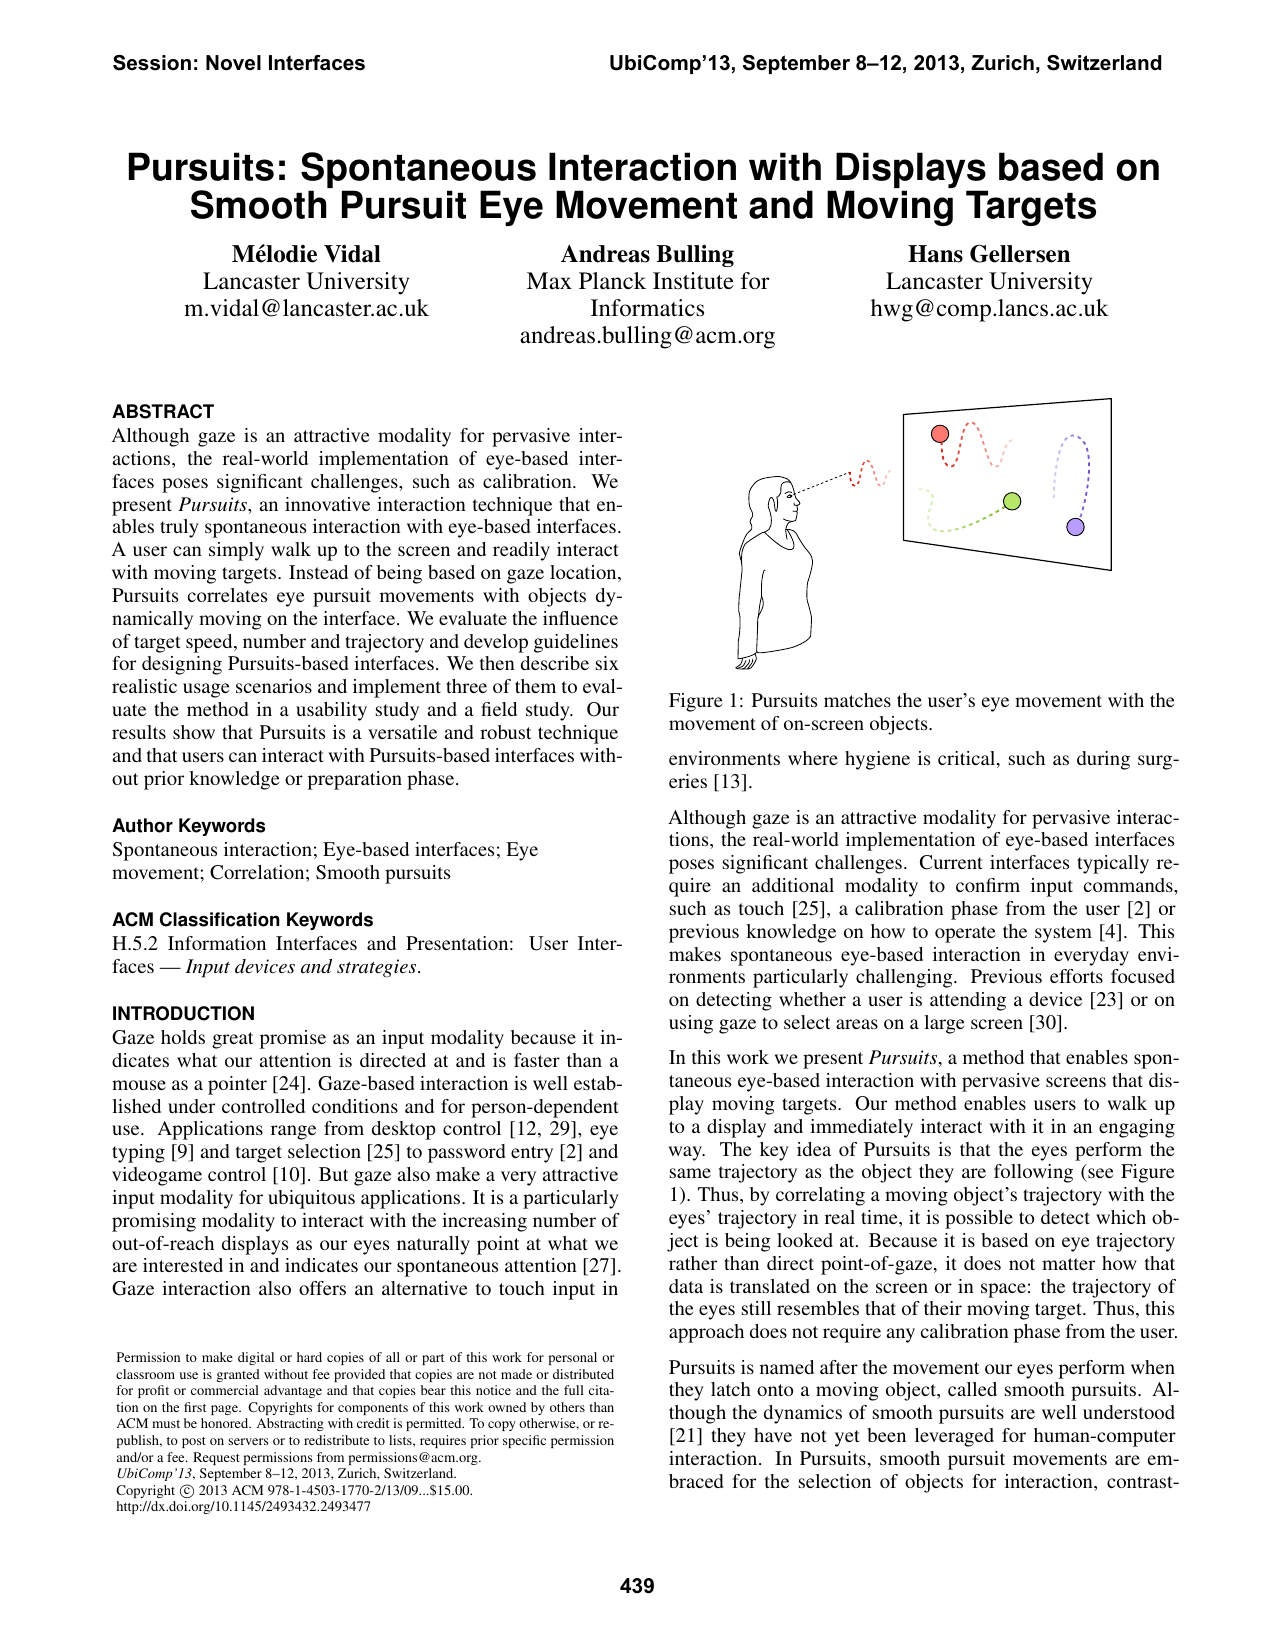 Pursuits: Spontaneous Interaction with Displays based on Smooth Pursuit Eye Movement and Moving Targets